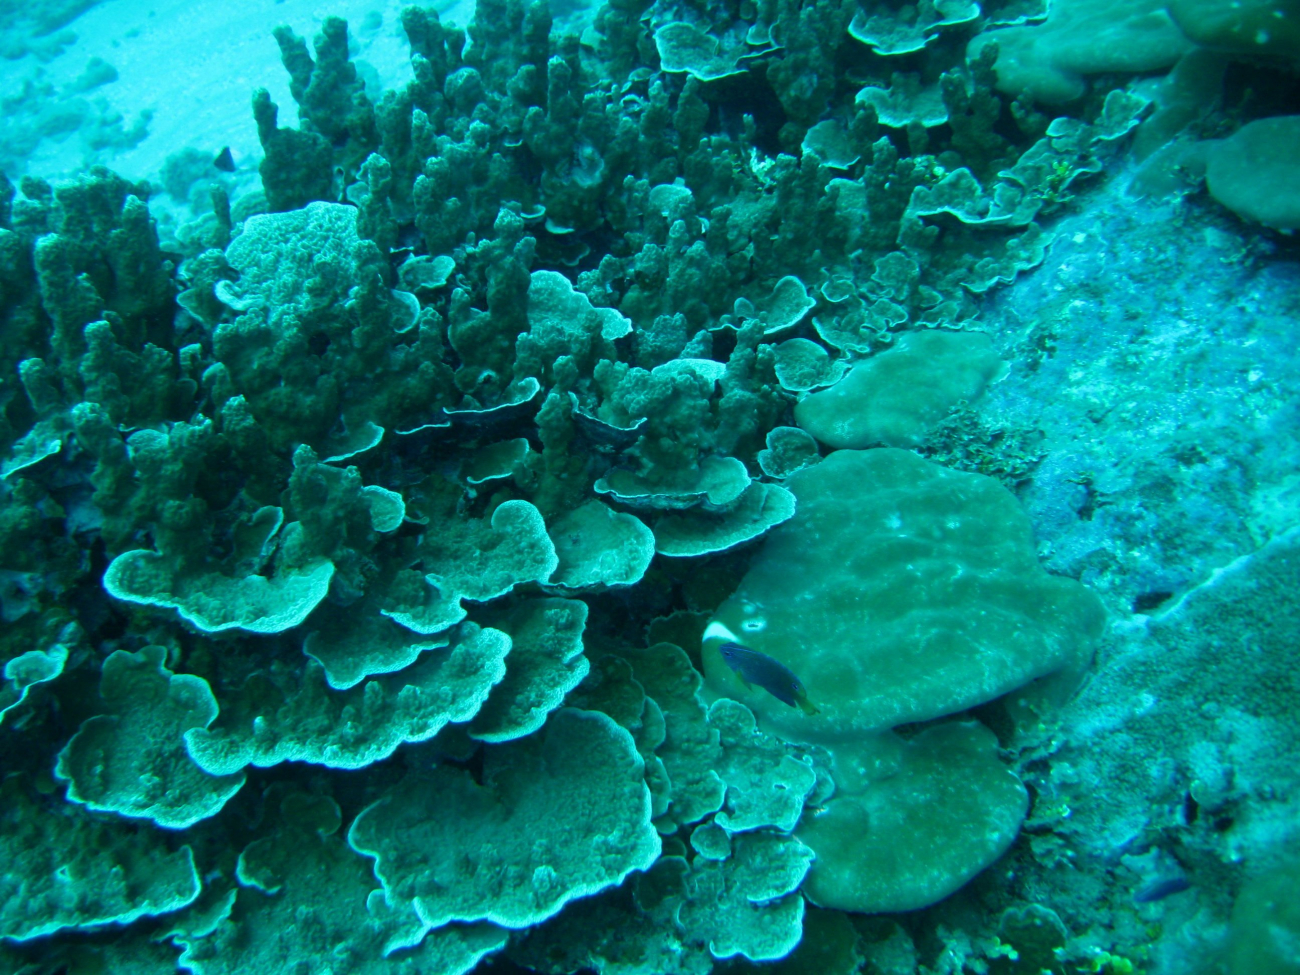 Reef scene with a variety of coral structures